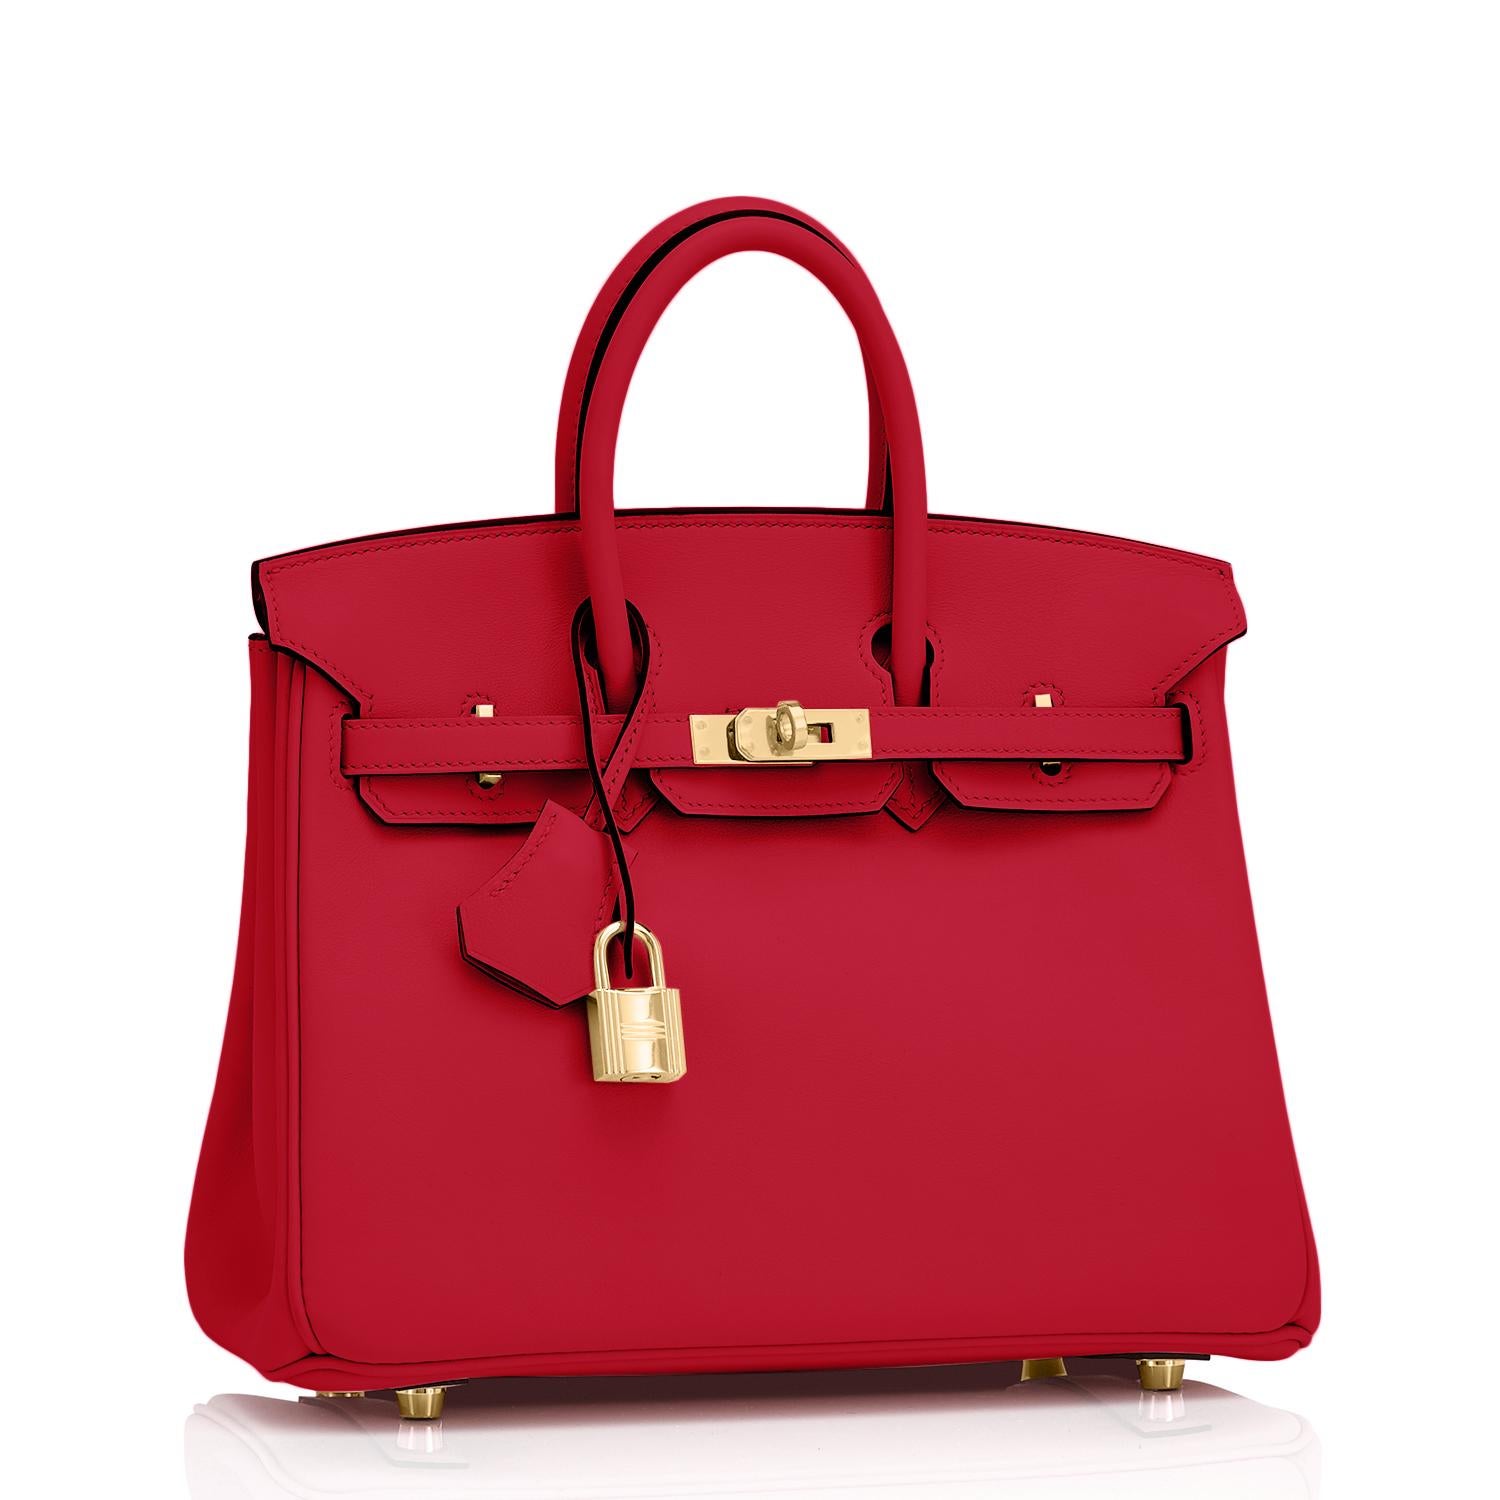 Hermes Birkin 25cm Rouge Piment Swift Red Gold Hardware Y Stamp, 2020
Just purchased from Hermes store; bag bears new interior 2020 Y Stamp.
Brand New in Box. Store fresh. Pristine Condition (with plastic on hardware)
Perfect gift! Comes with keys,